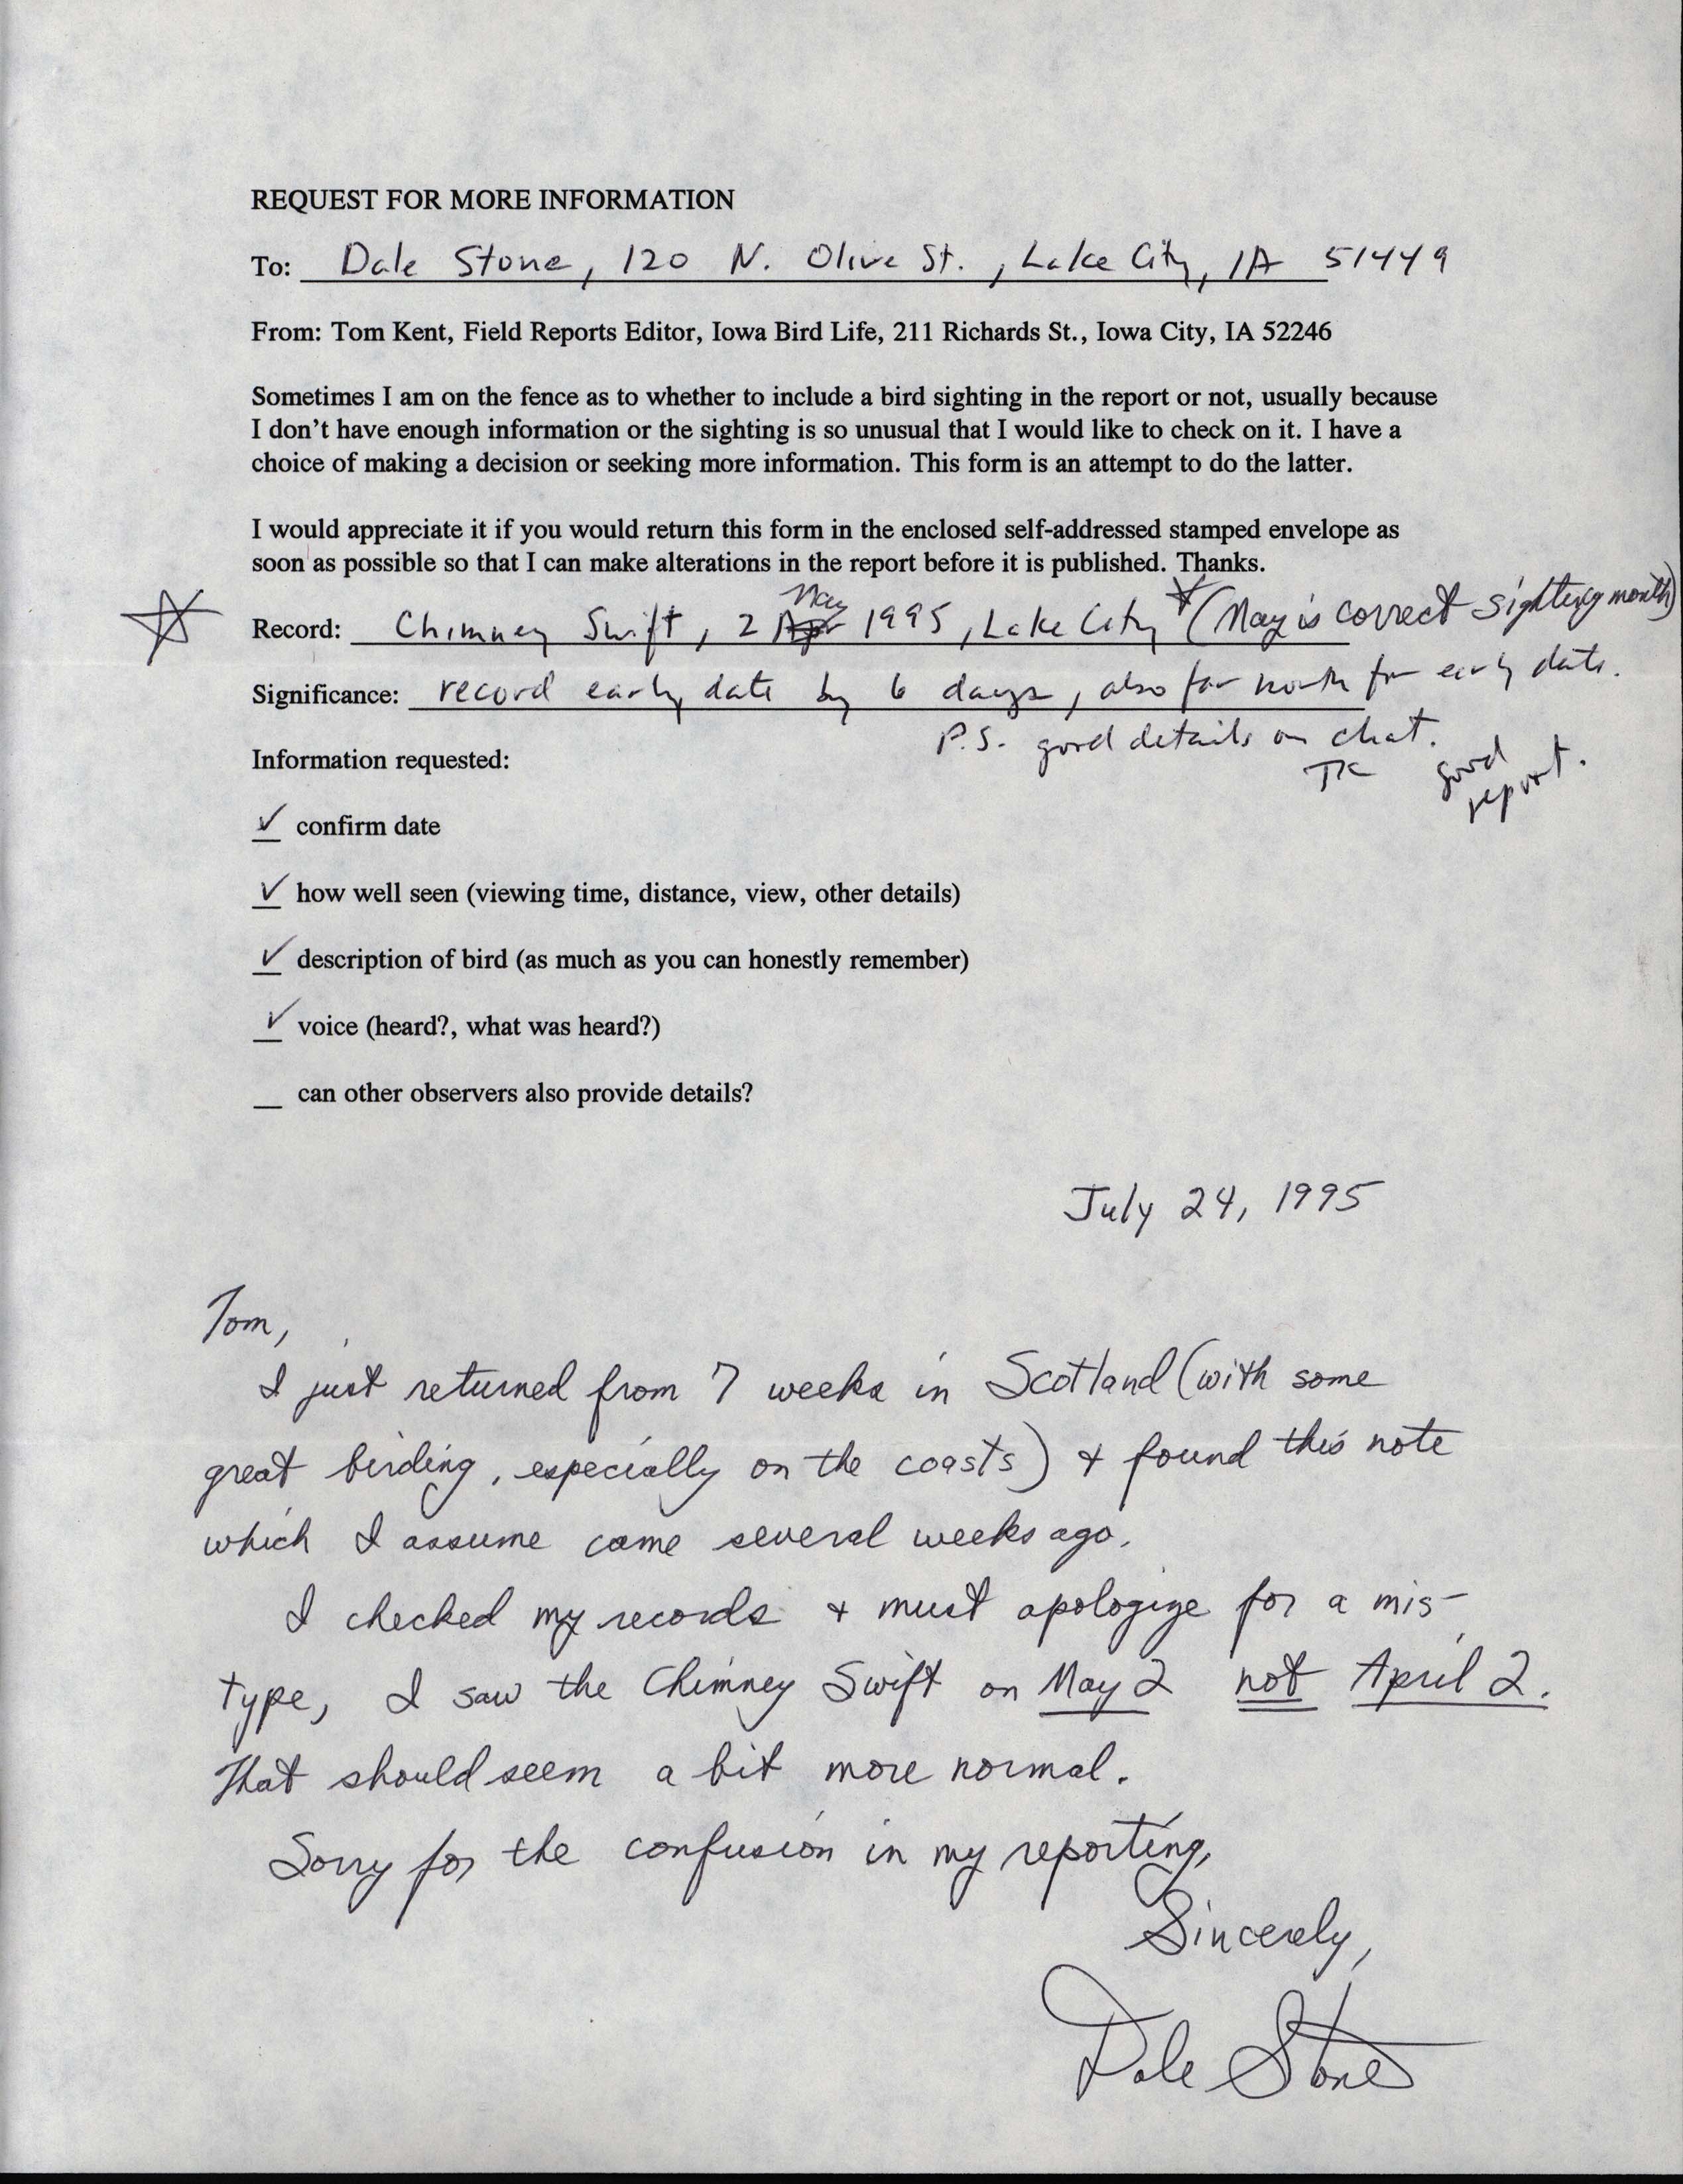 Thomas Kent letter to Dale Stone regarding request for more information, spring 1995